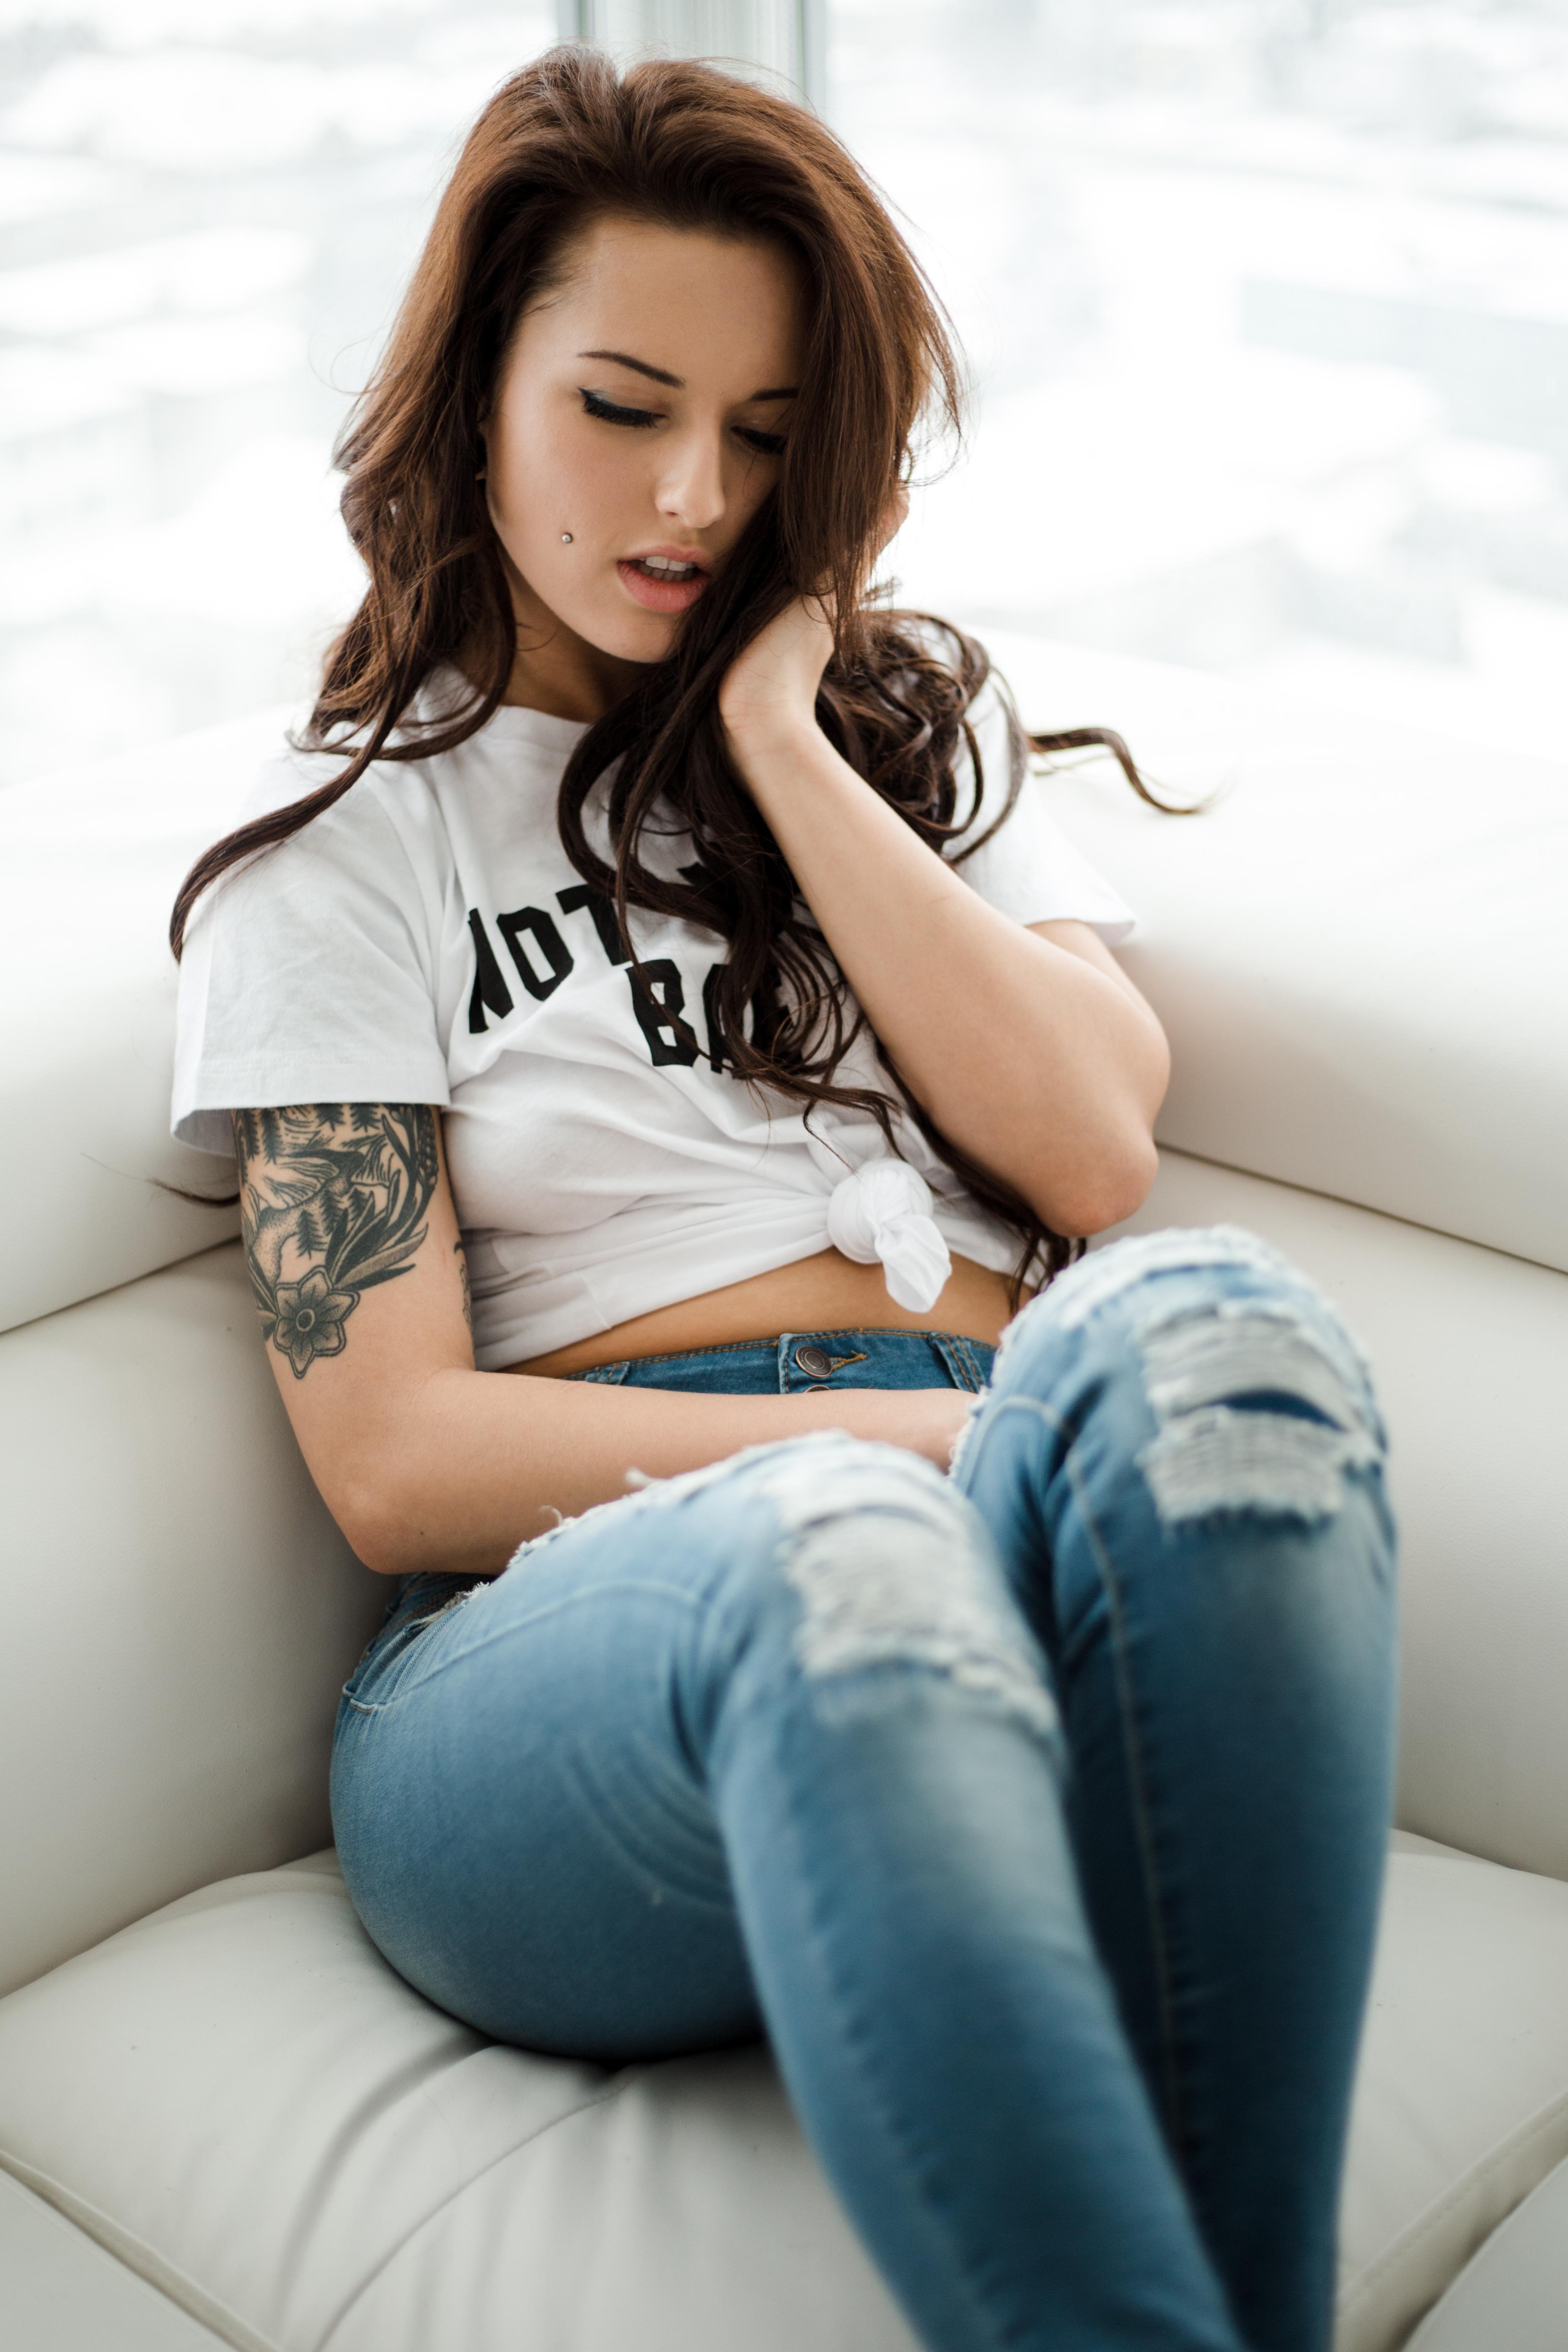 100 Girl In Jeans Pictures  Wallpaperscom